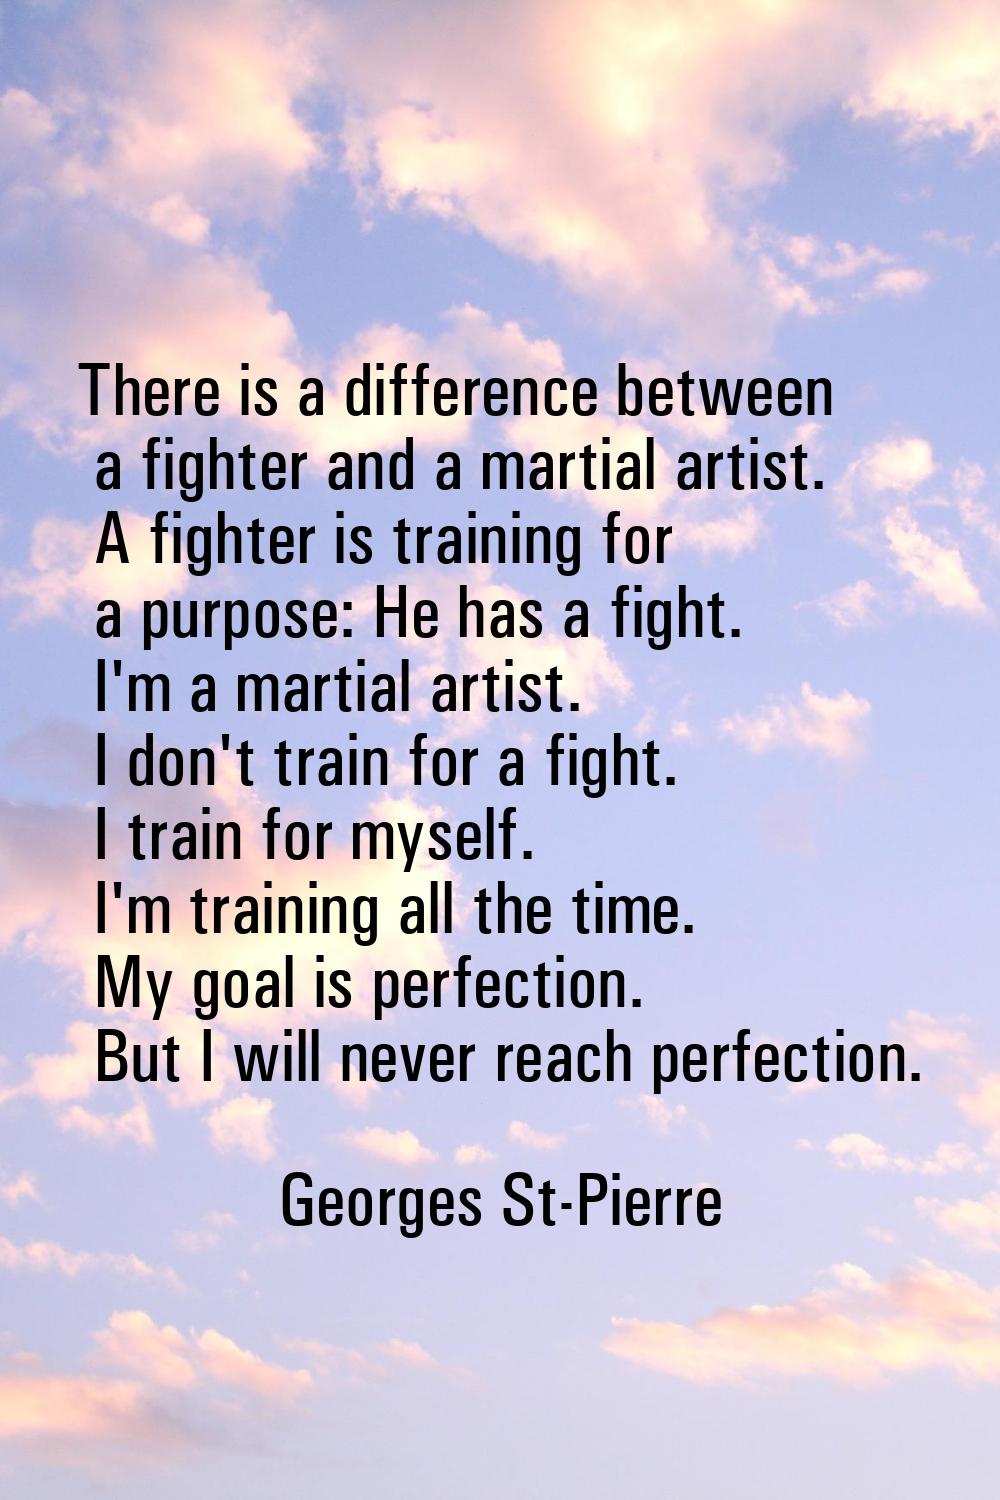 There is a difference between a fighter and a martial artist. A fighter is training for a purpose: 